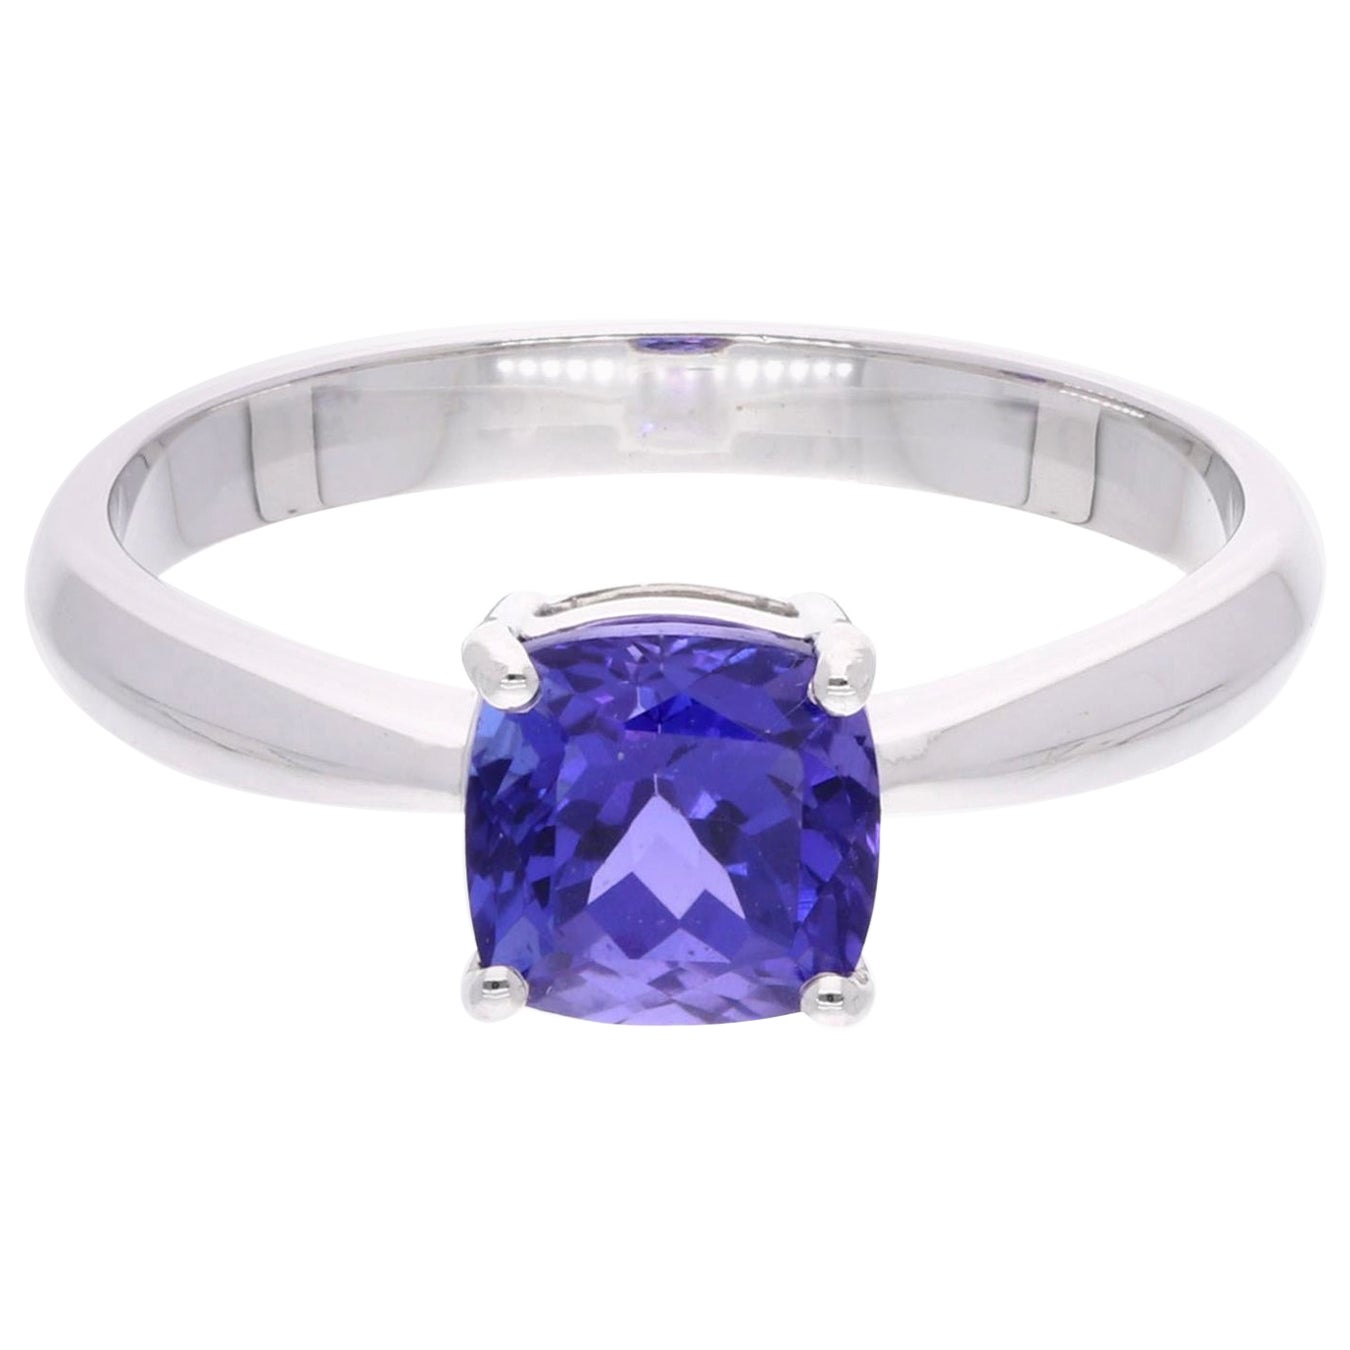 1.67 Carat Solitaire Cushion Tanzanite Ring 18 Solid Karat White Gold Jewelry For Sale